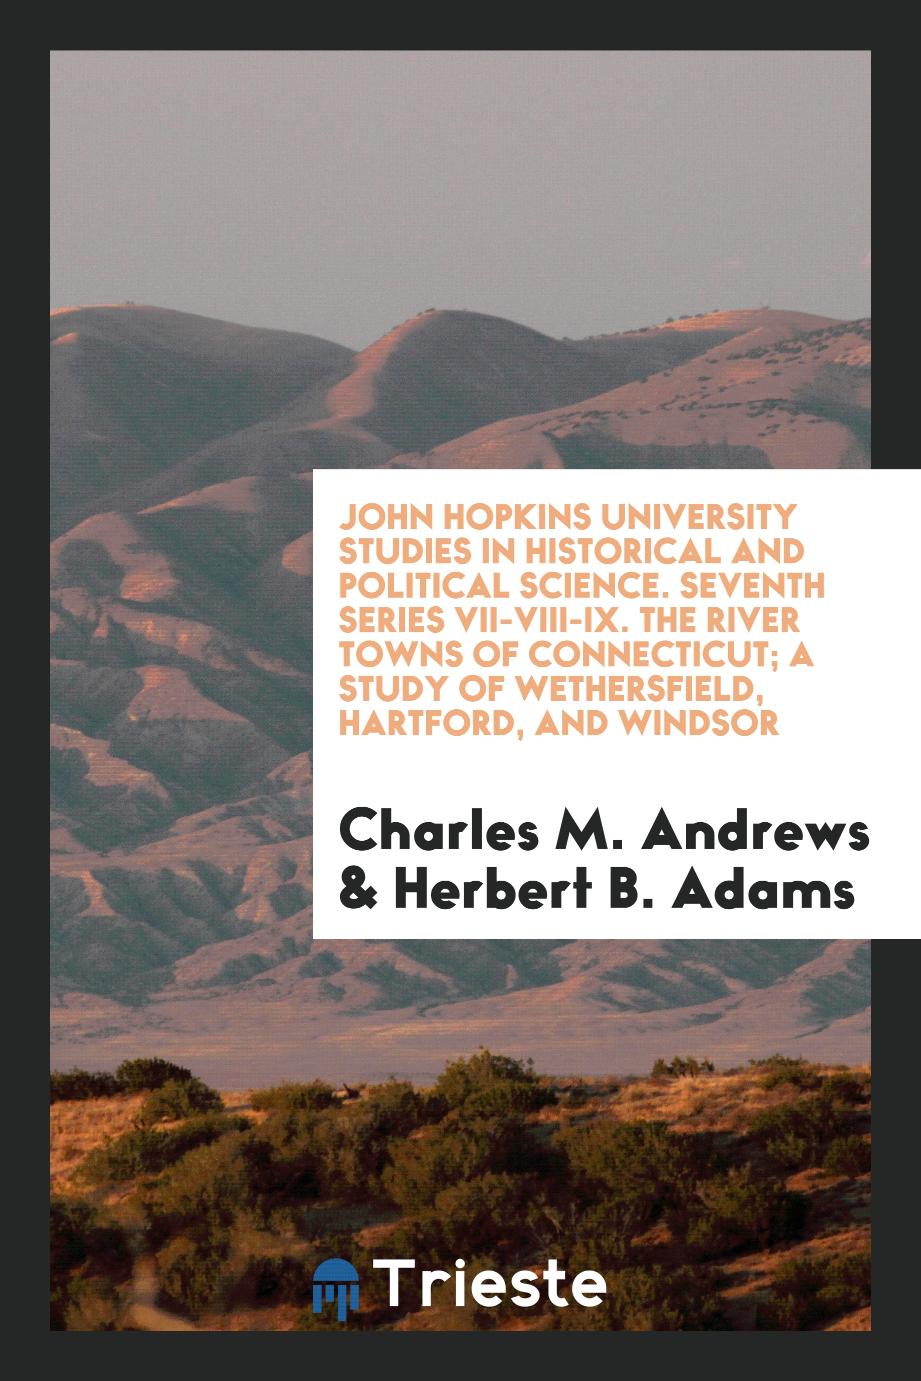 John Hopkins University Studies in Historical and Political Science. Seventh Series VII-VIII-IX. The River Towns of Connecticut; A Study of Wethersfield, Hartford, and Windsor